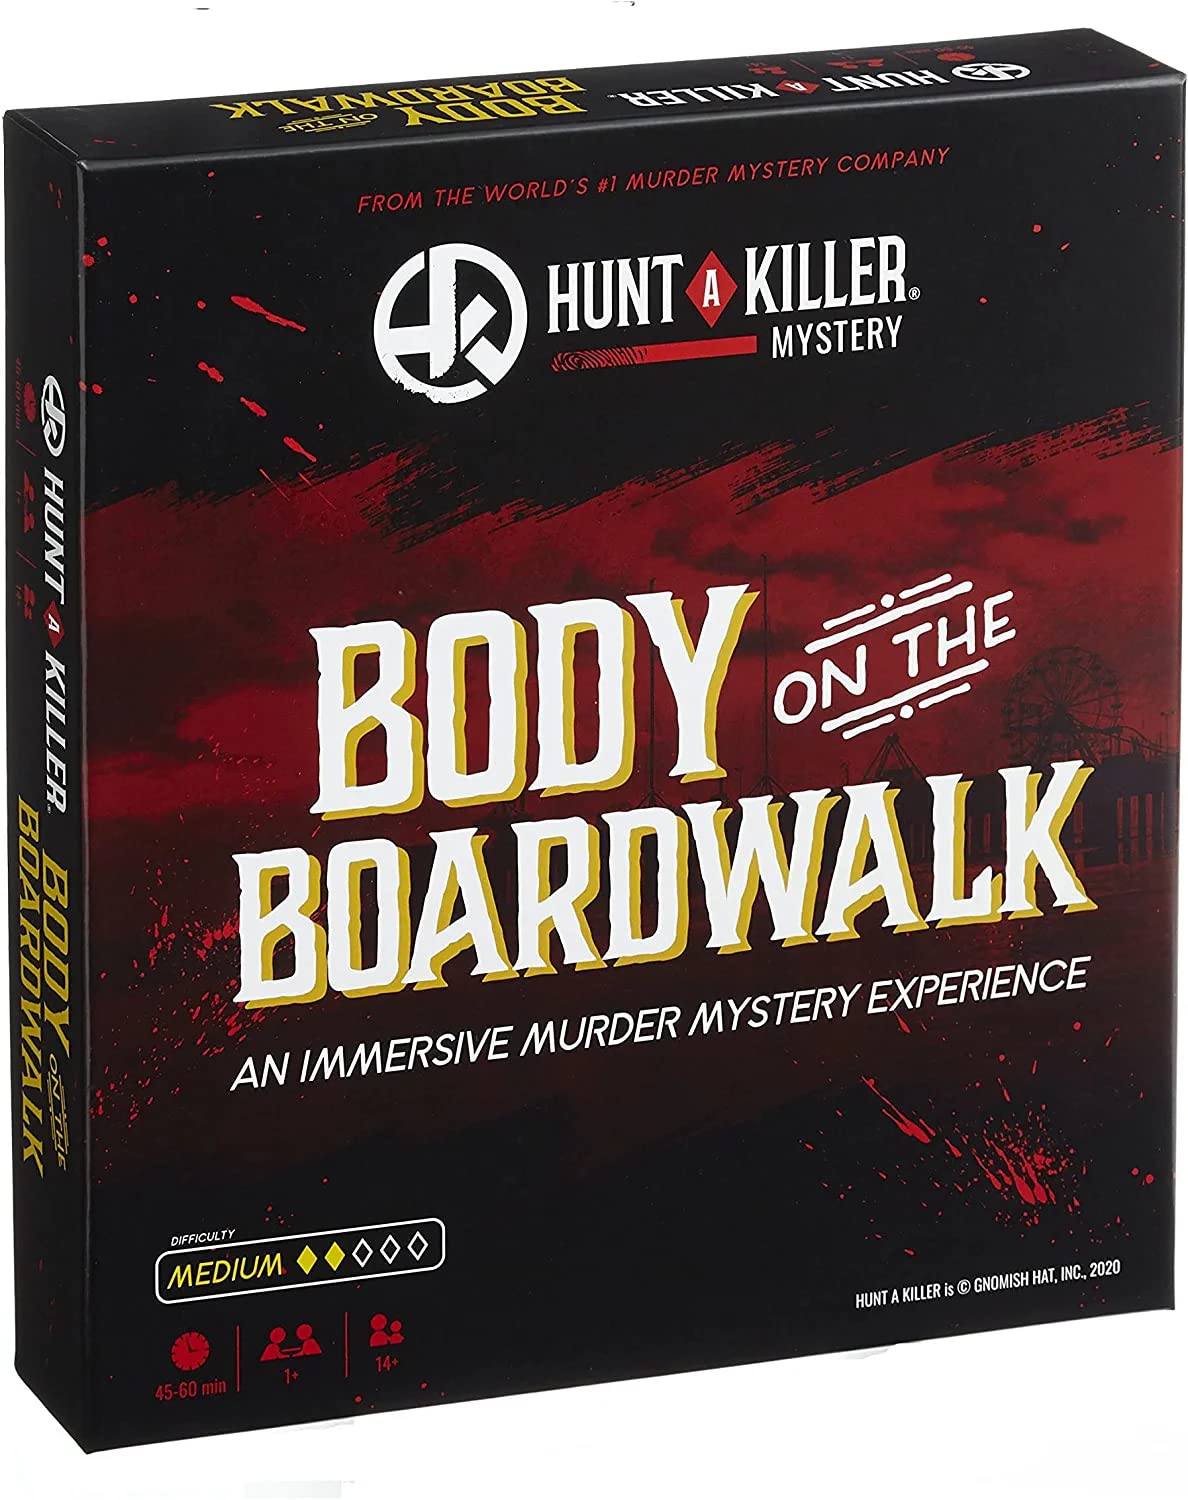 Hunt A Killer Body On The Boardwalk, Immersive Murder Mystery Game -Take on The Unsolved Case for Independent Challenge, Date Night, or with Family & Friends as Detectives , Age 14+